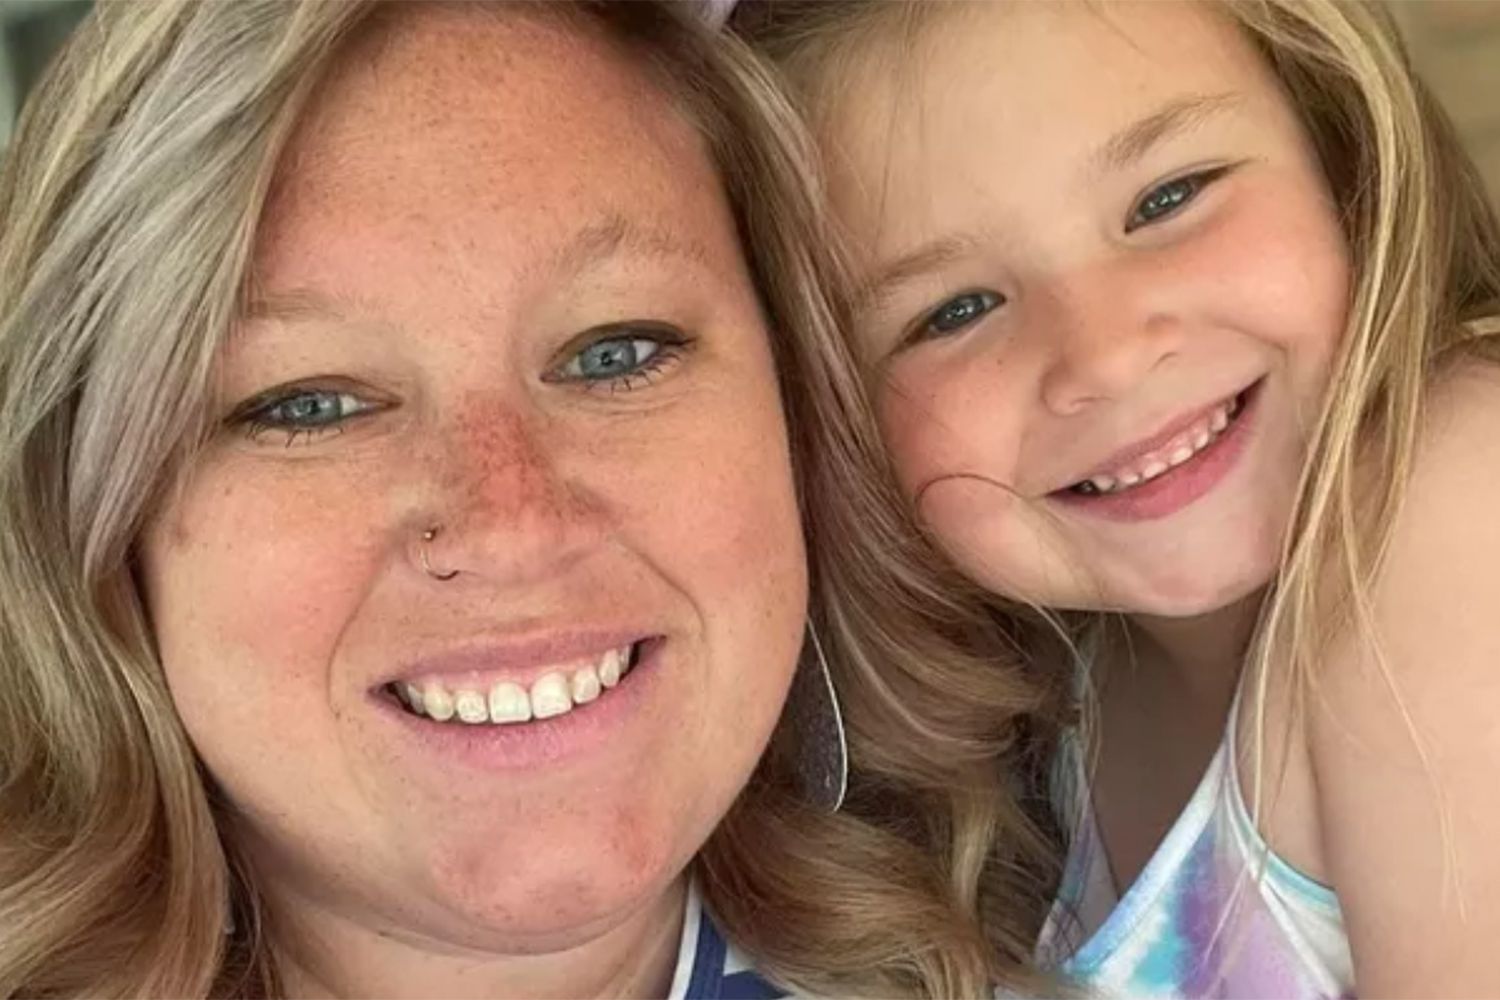 South Carolina Mother of 3 and ‘Spunky’ 6-Year-Old Daughter Killed in Crash: ‘There Are No Words’